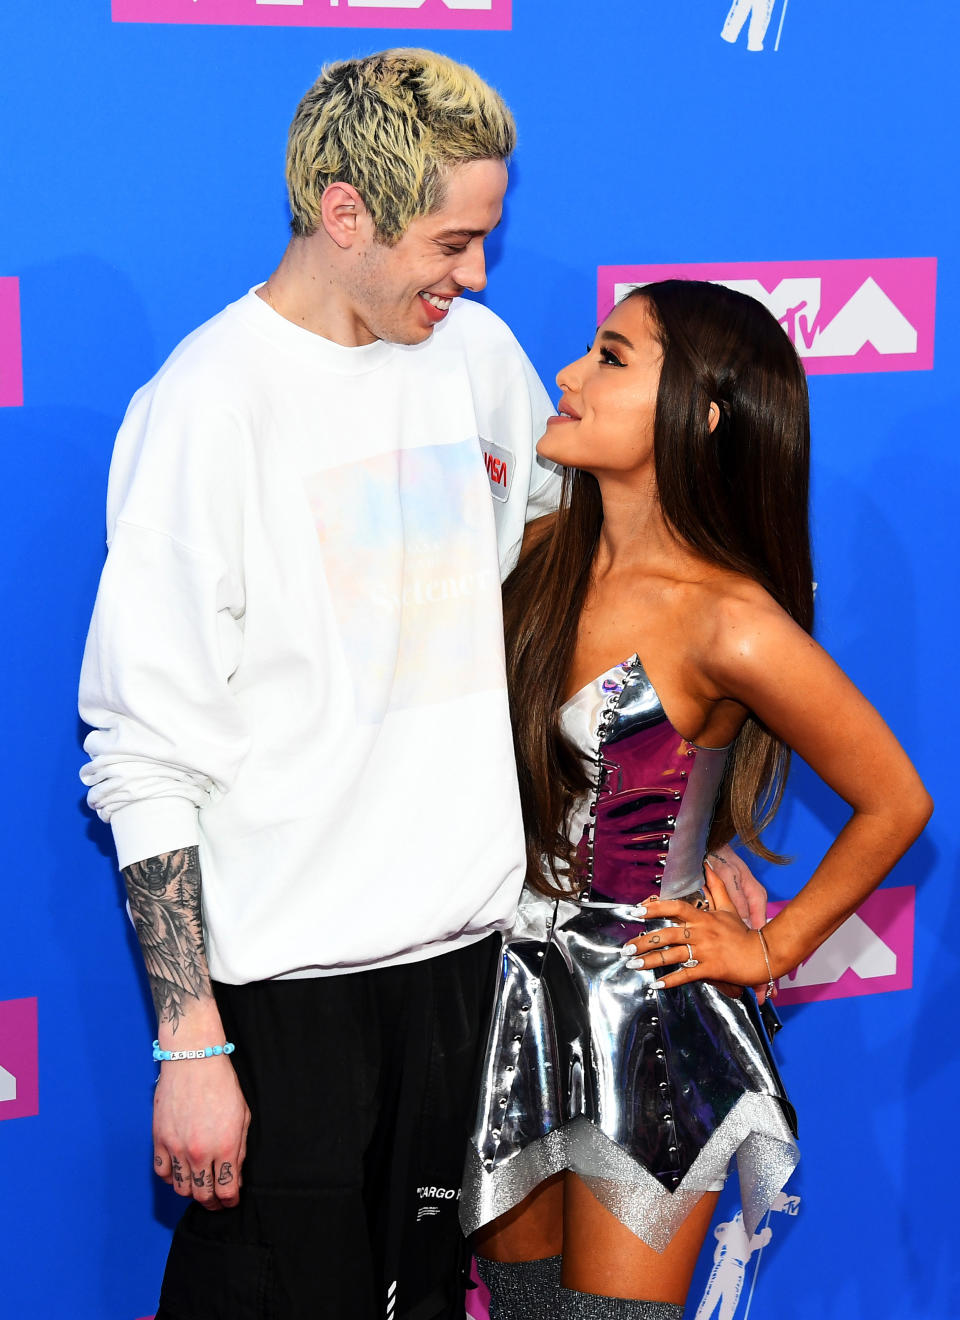 Pete and Ariana looking at each other and smiling